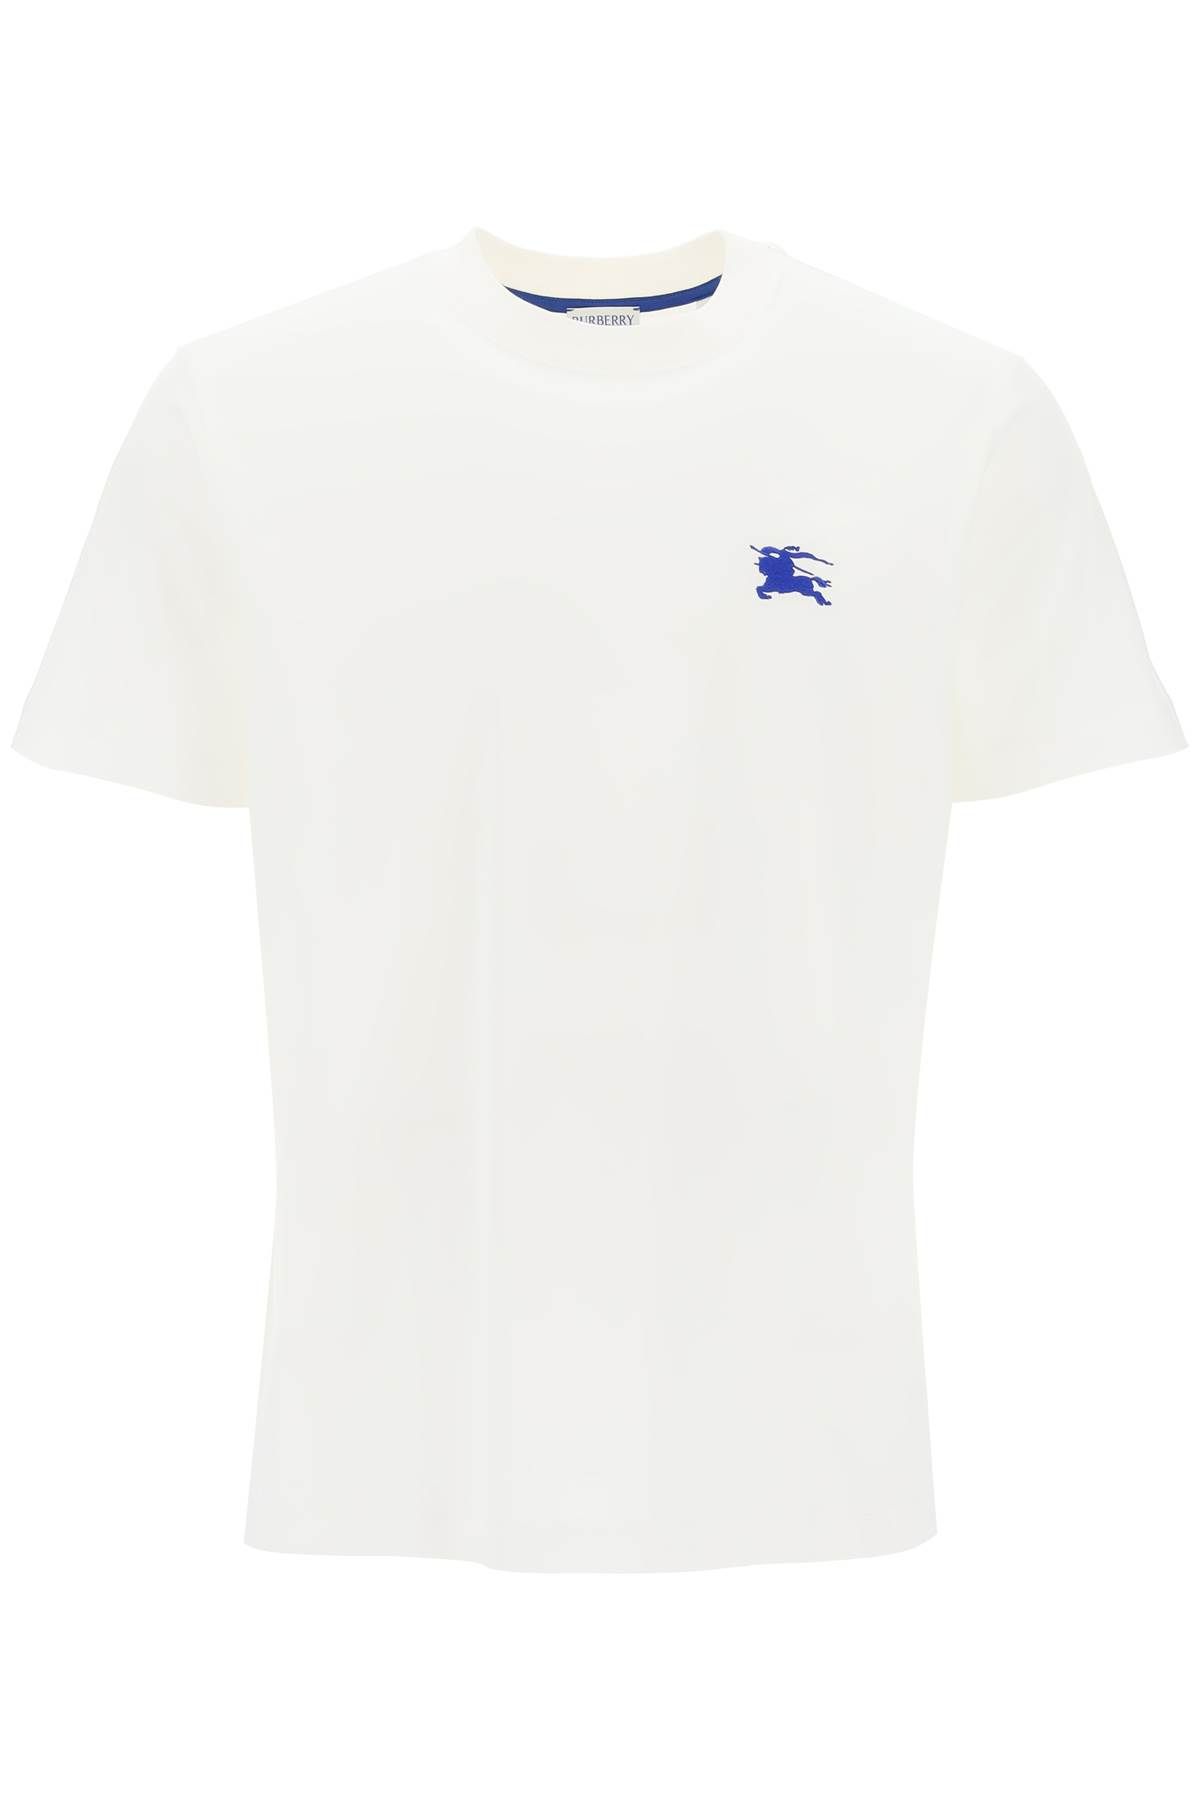 Burberry BURBERRY "ekd embroidered t-shirt